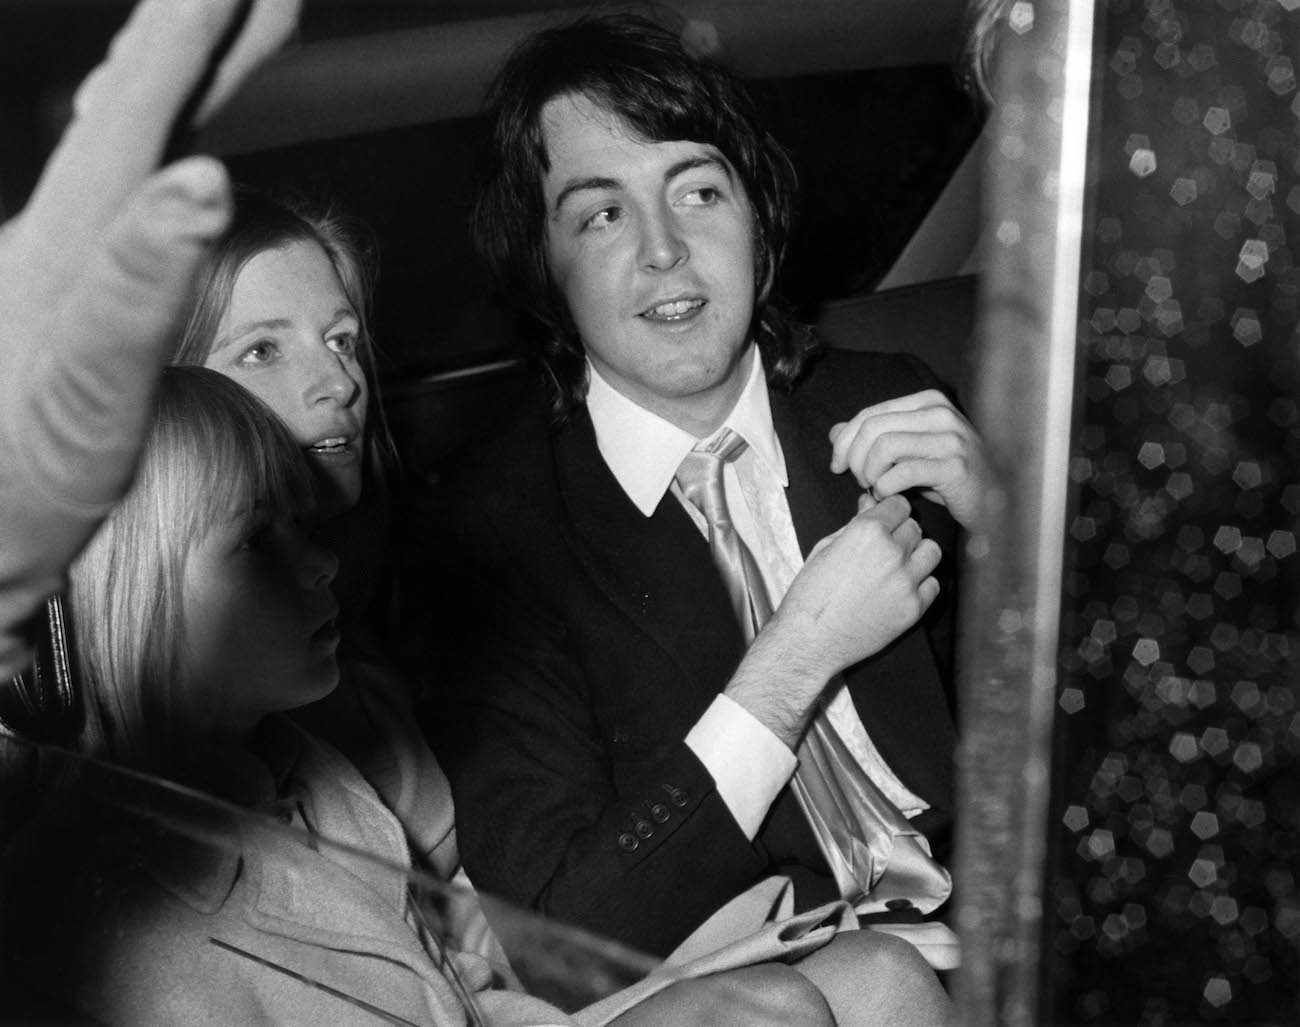 Paul McCartney after getting married to his wife Linda in 1969.